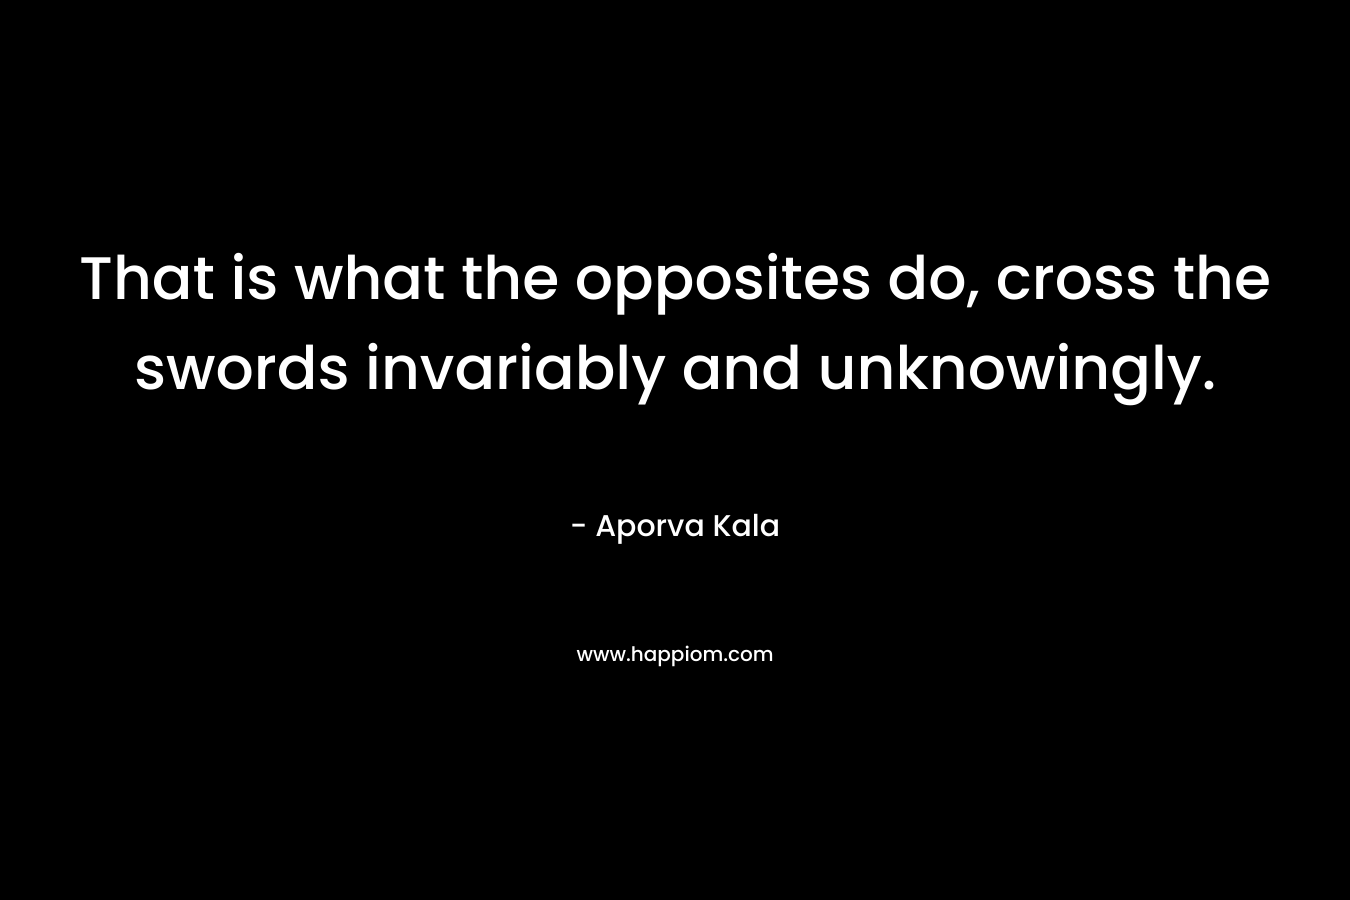 That is what the opposites do, cross the swords invariably and unknowingly. – Aporva Kala